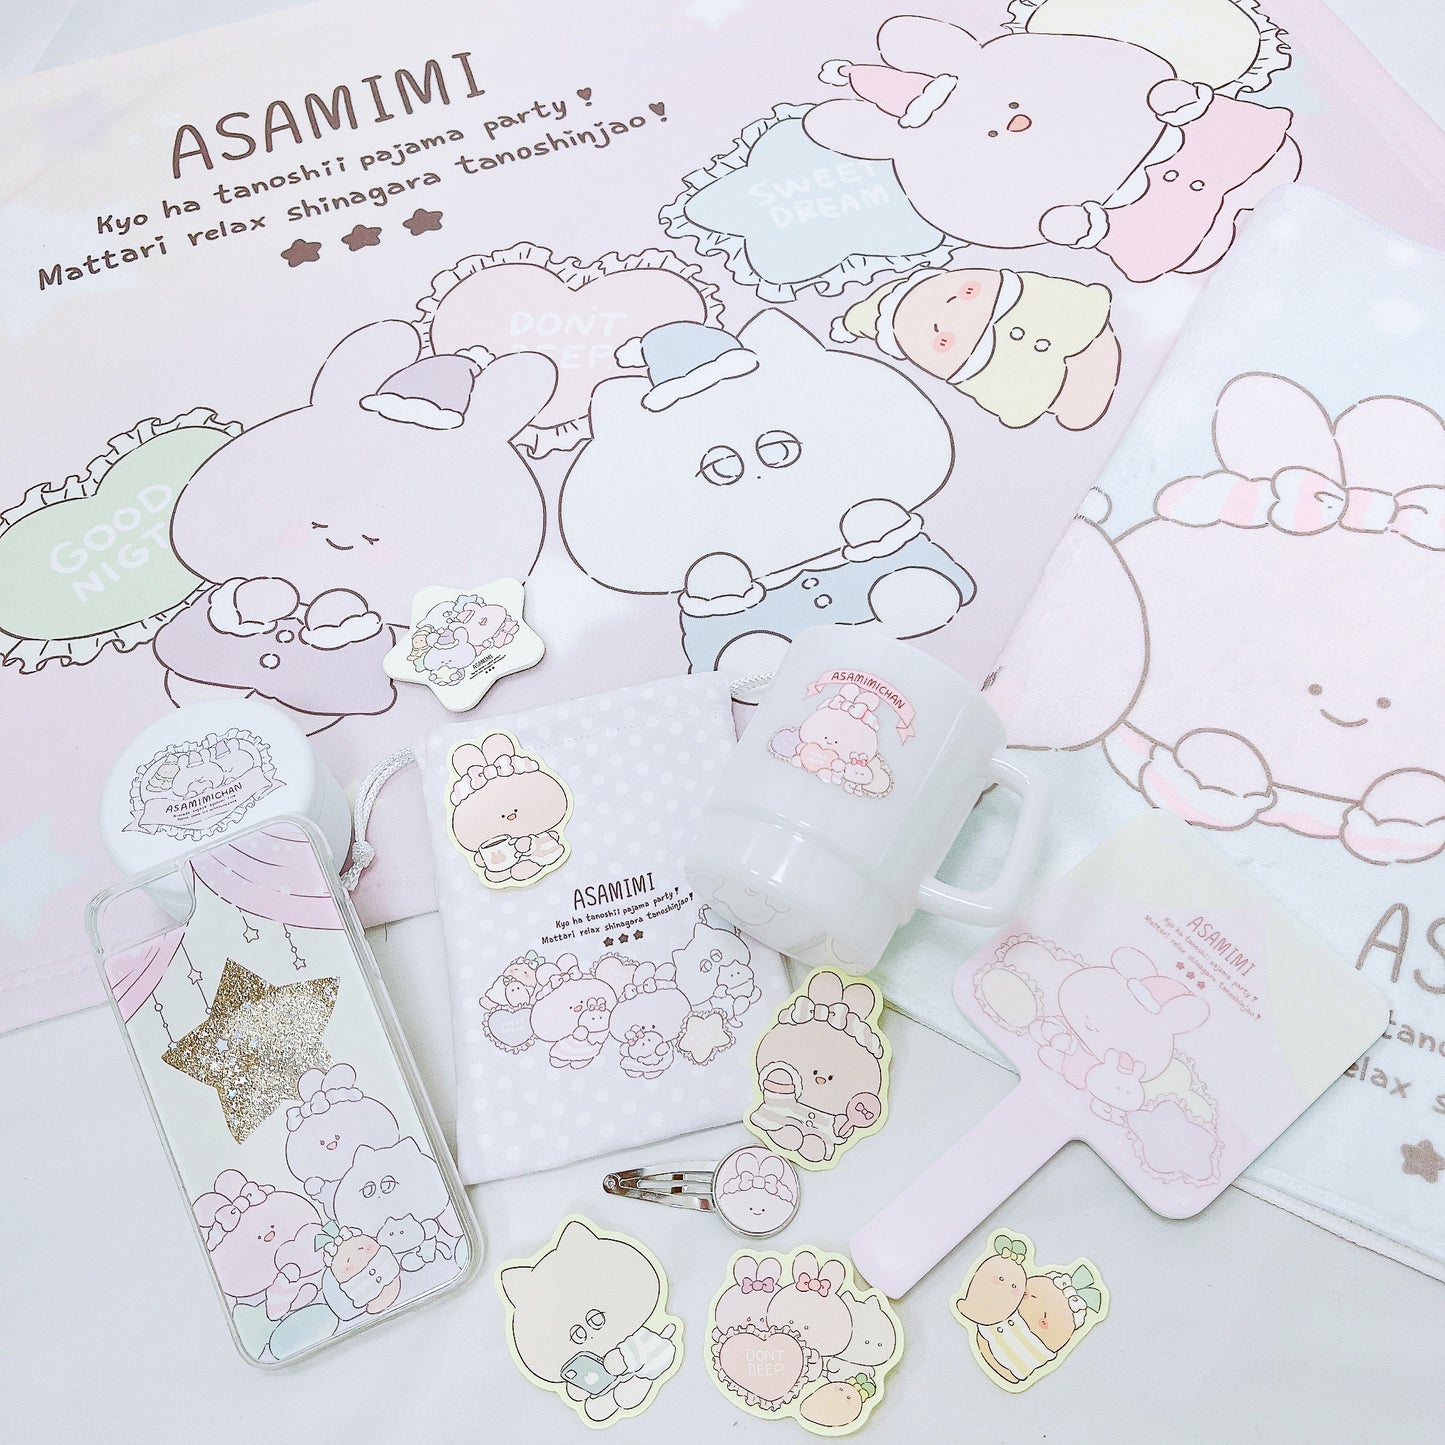 [Asamimi-chan] Handheld mirror (pajama party) [shipped in early October]